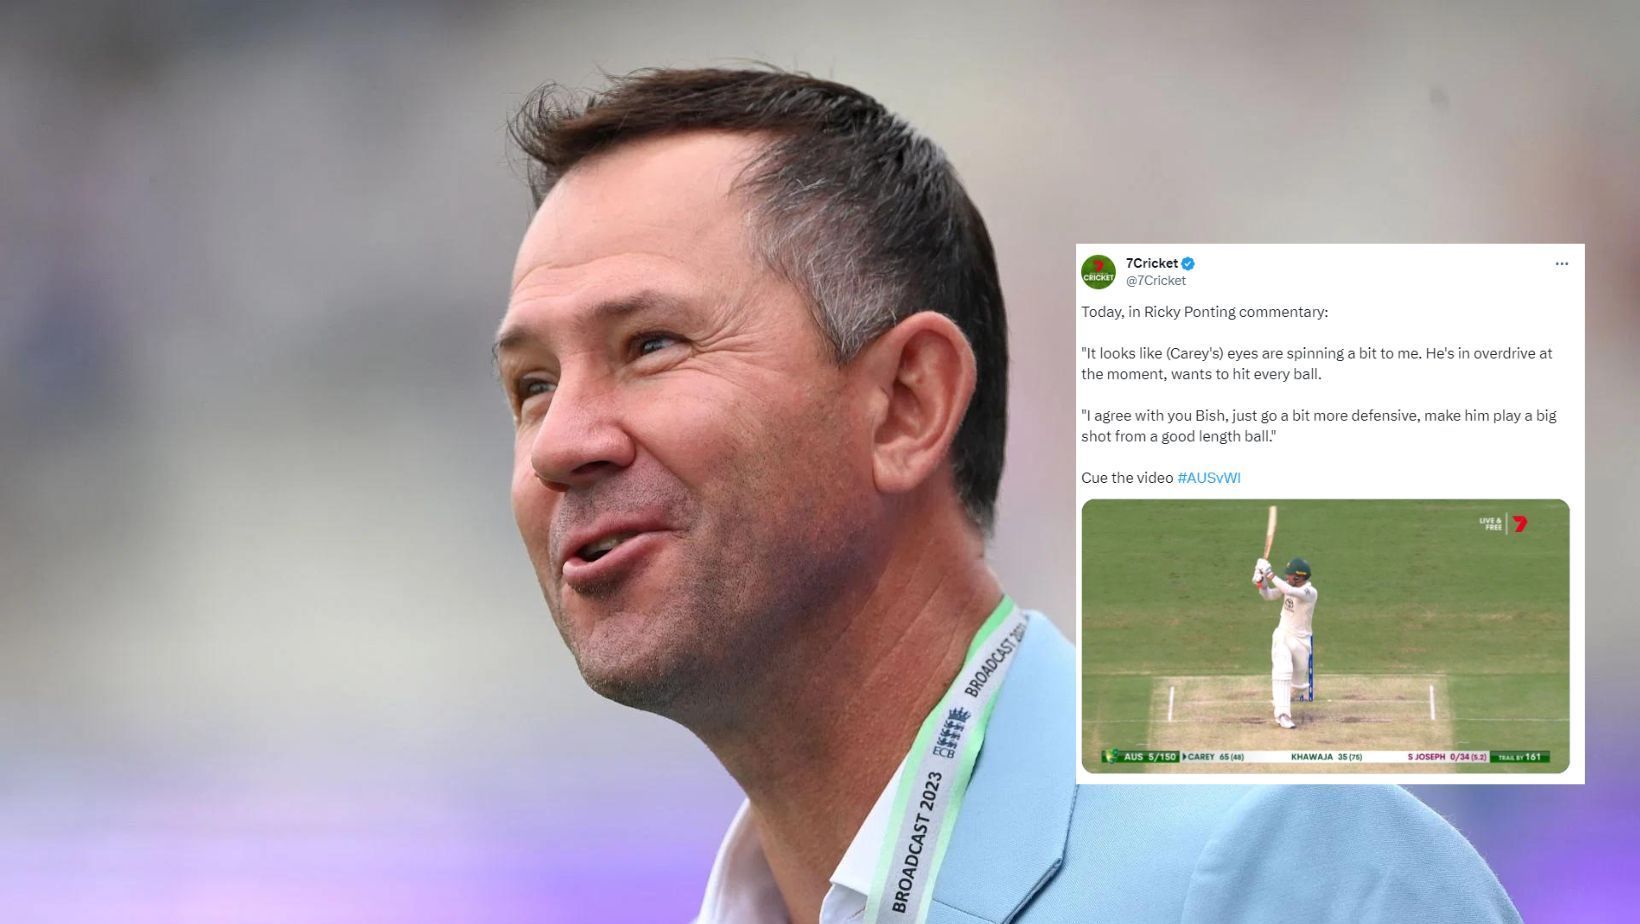 Ricky Ponting accurately foresaw Alex Carey